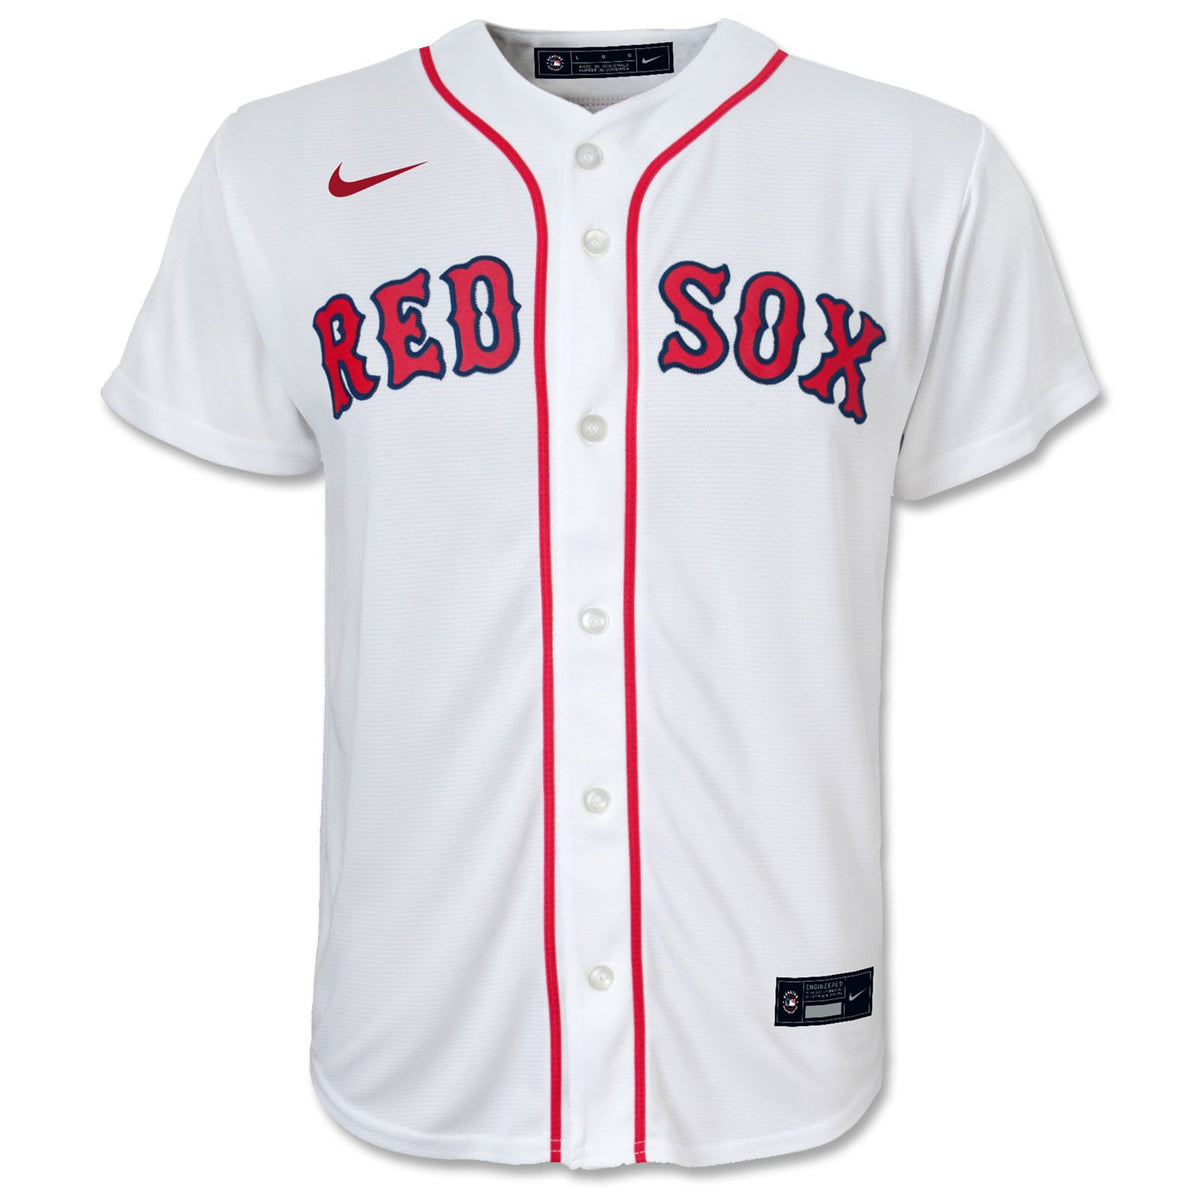 red sox jersey red